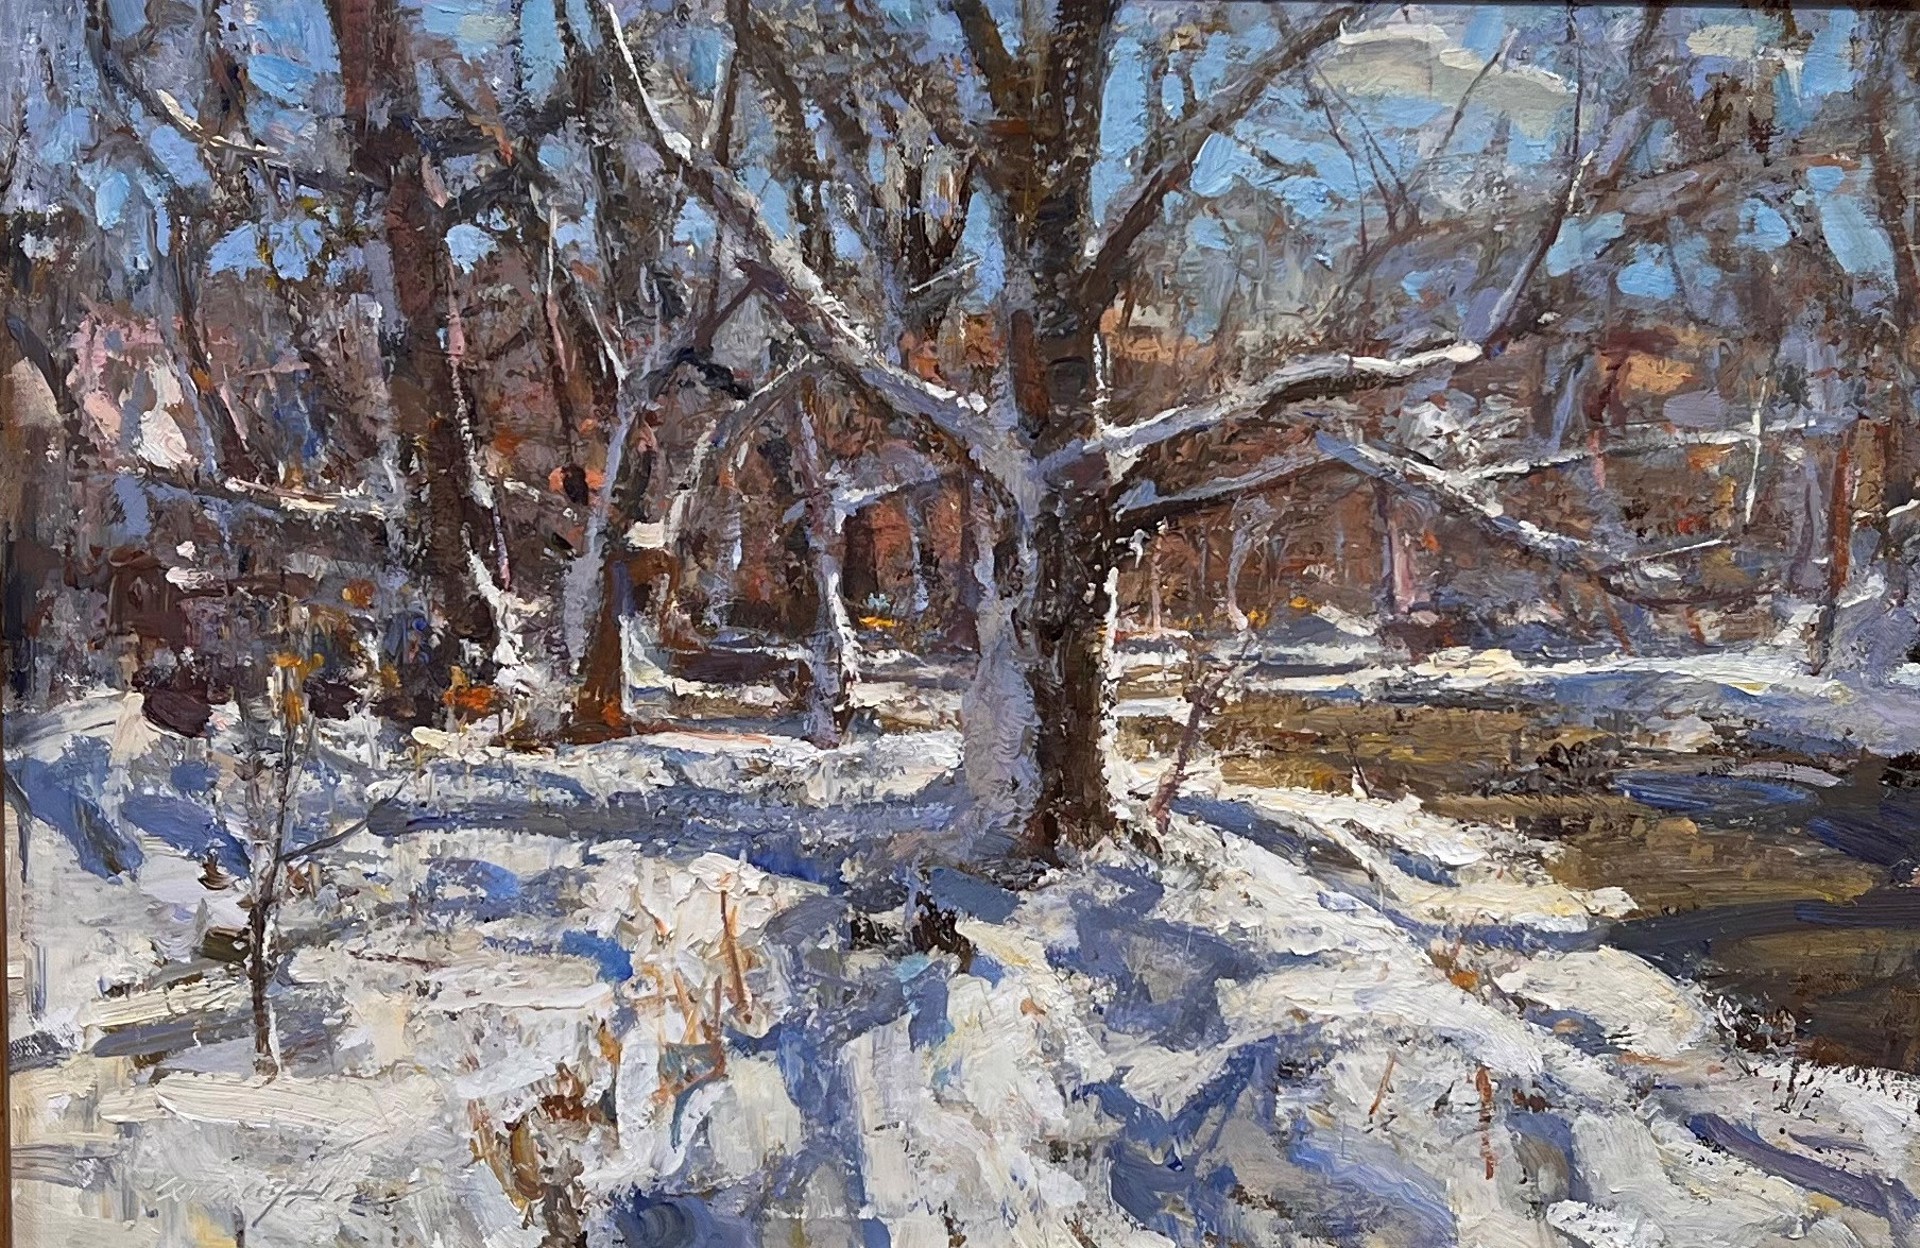 Snow by the Cherry Creek by Quang Ho